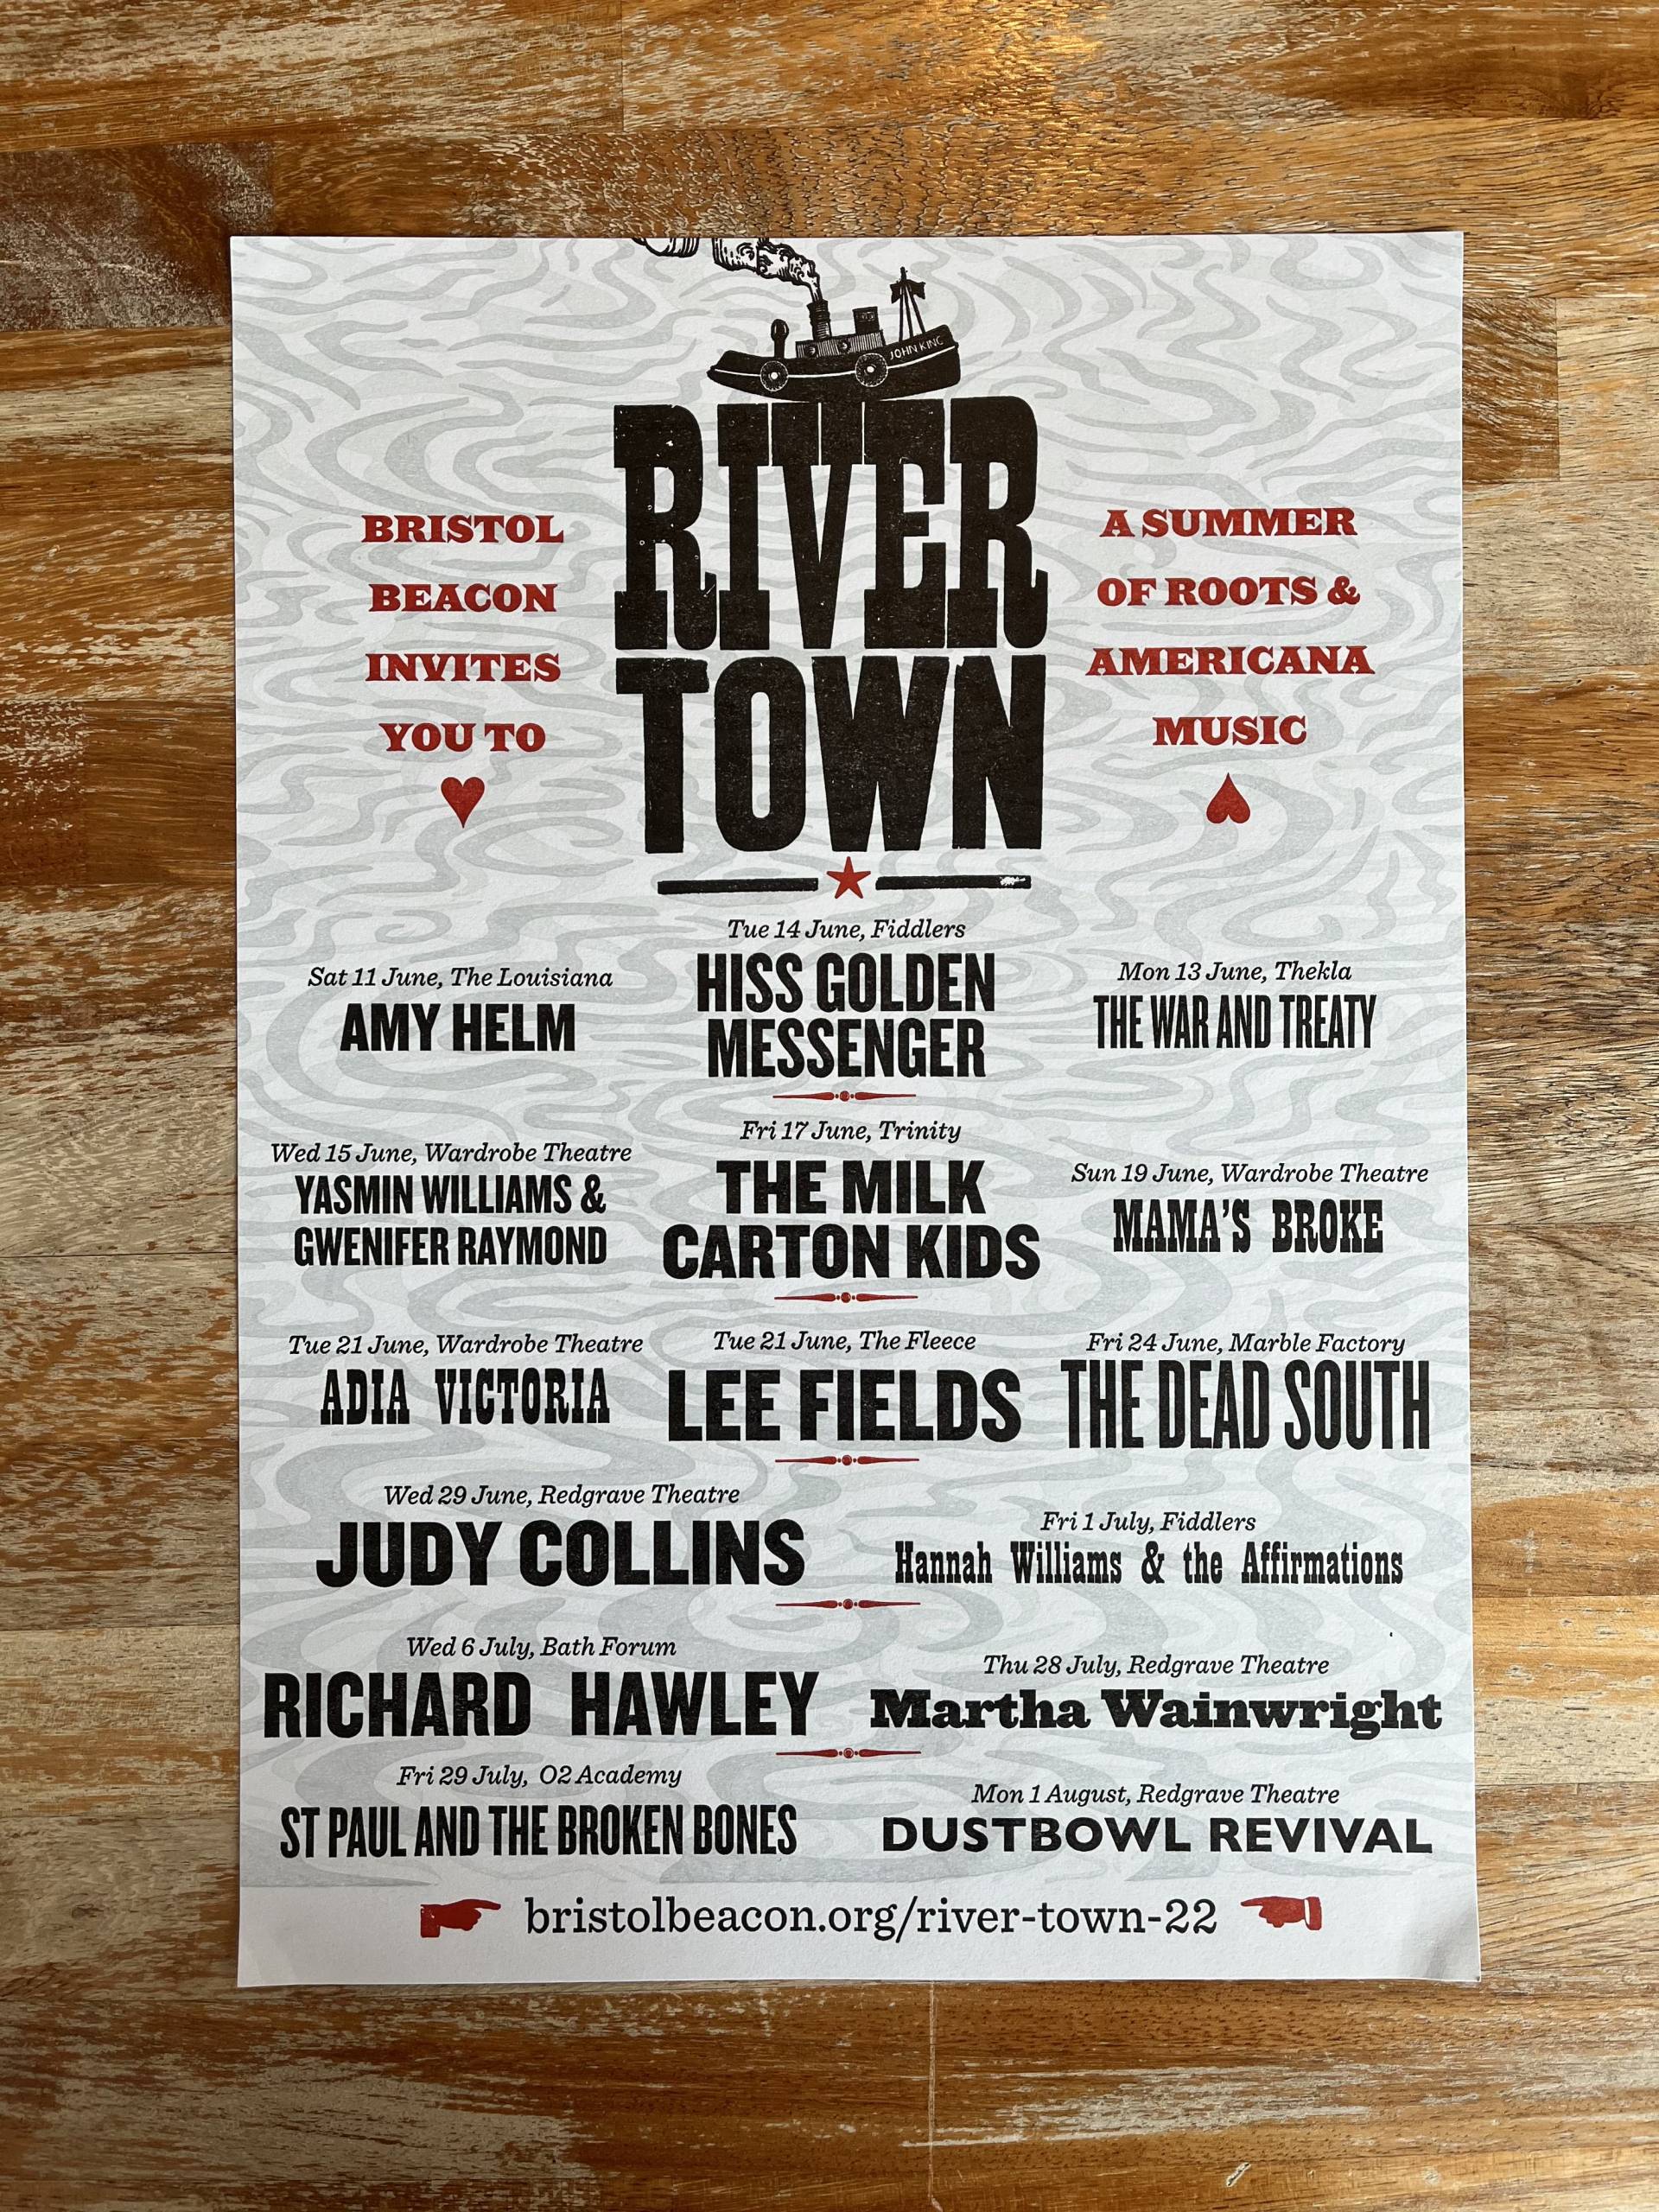 A letterpress printed poster for River Town 2022 displayed on a worn wooden surface. Text reads: Bristol Beacon invites you to River Town